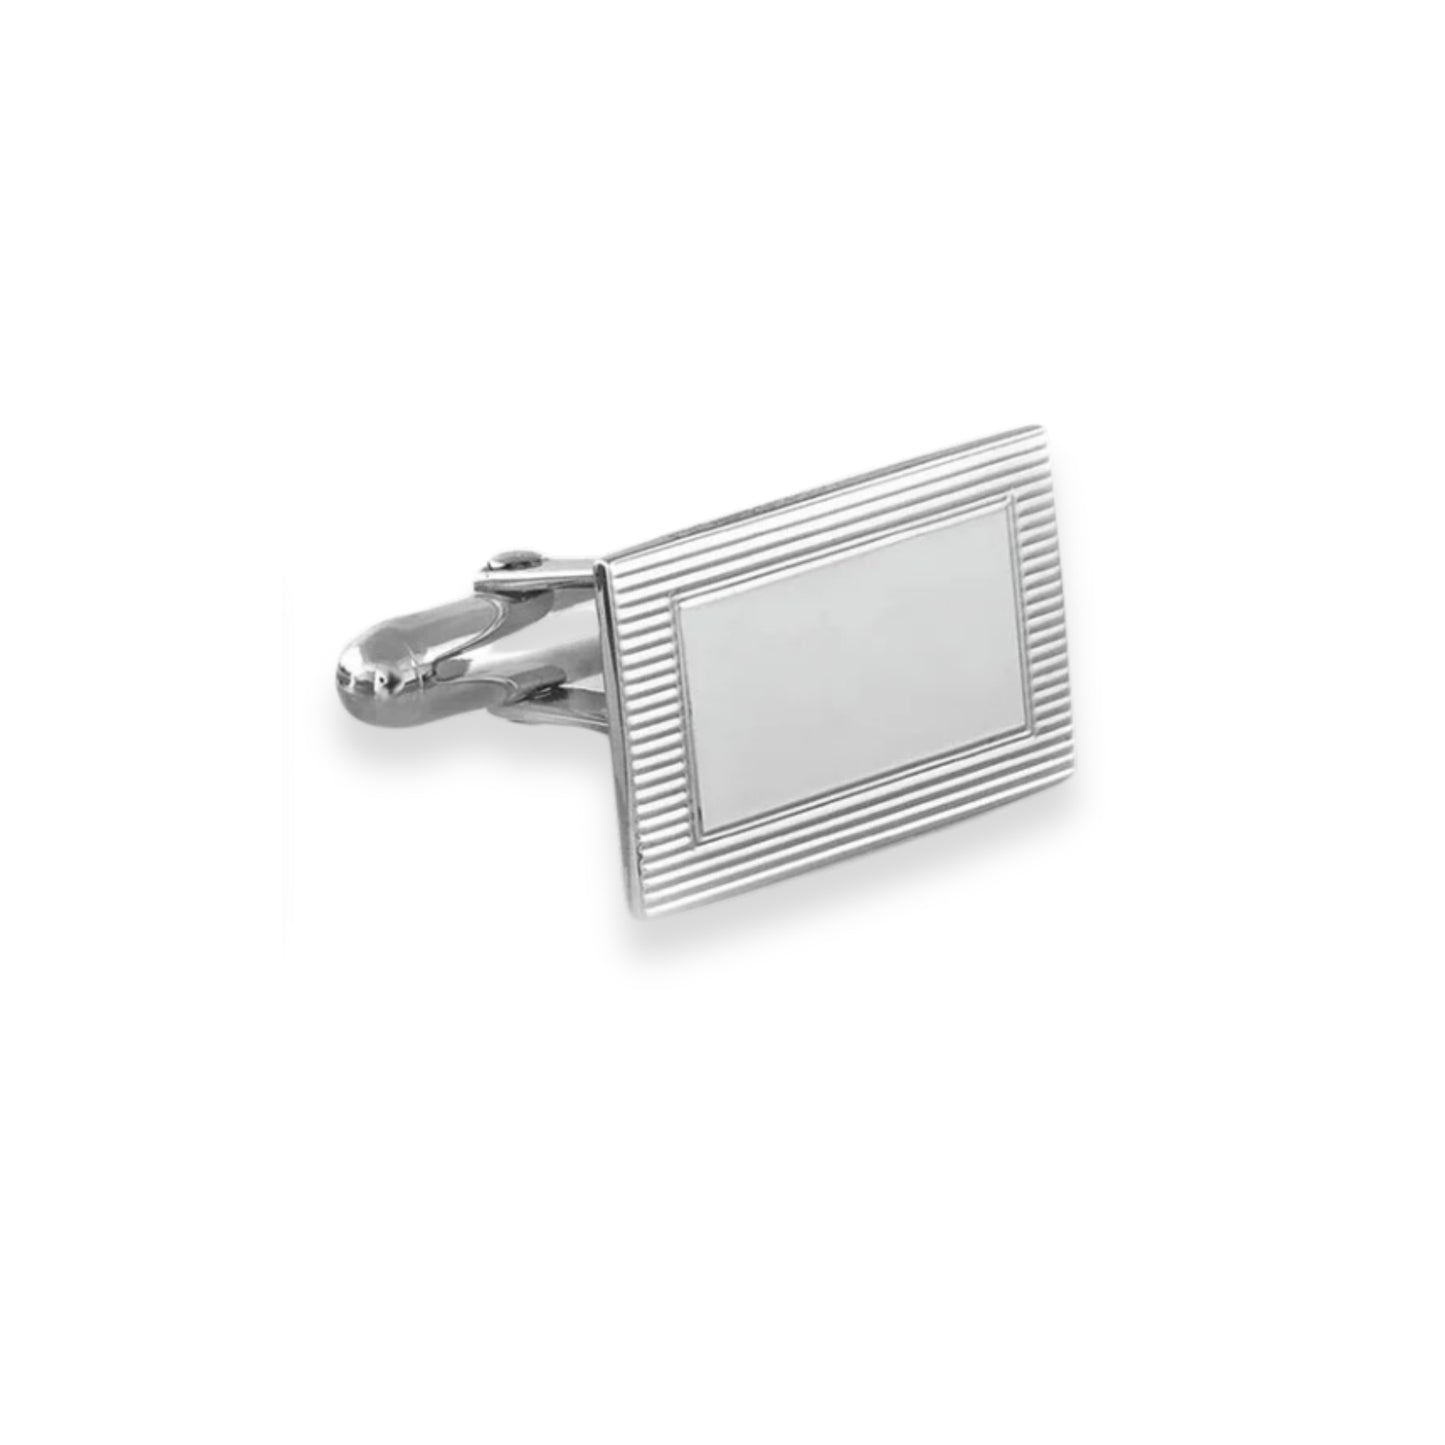 Sterling Silver Rectangular Cufflinks with Engine Turned Design